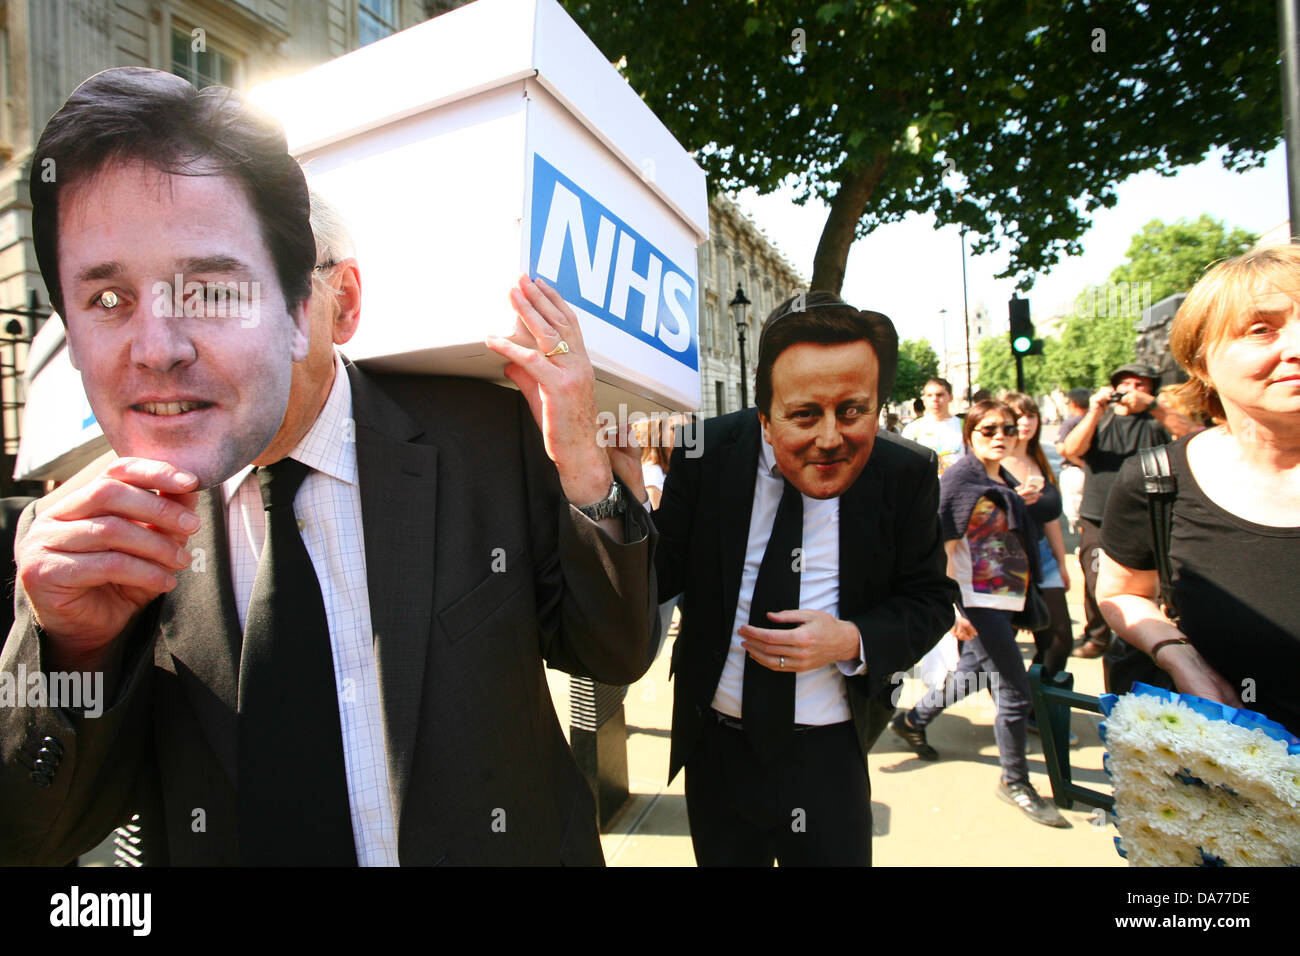 London, UK. 5th July, 2013. Medical staff march with a coffin to Downing Street to protest privatisation NHS on the 65th anniversary of it's founding  Credit:  Mario Mitsis / Alamy Live News Stock Photo